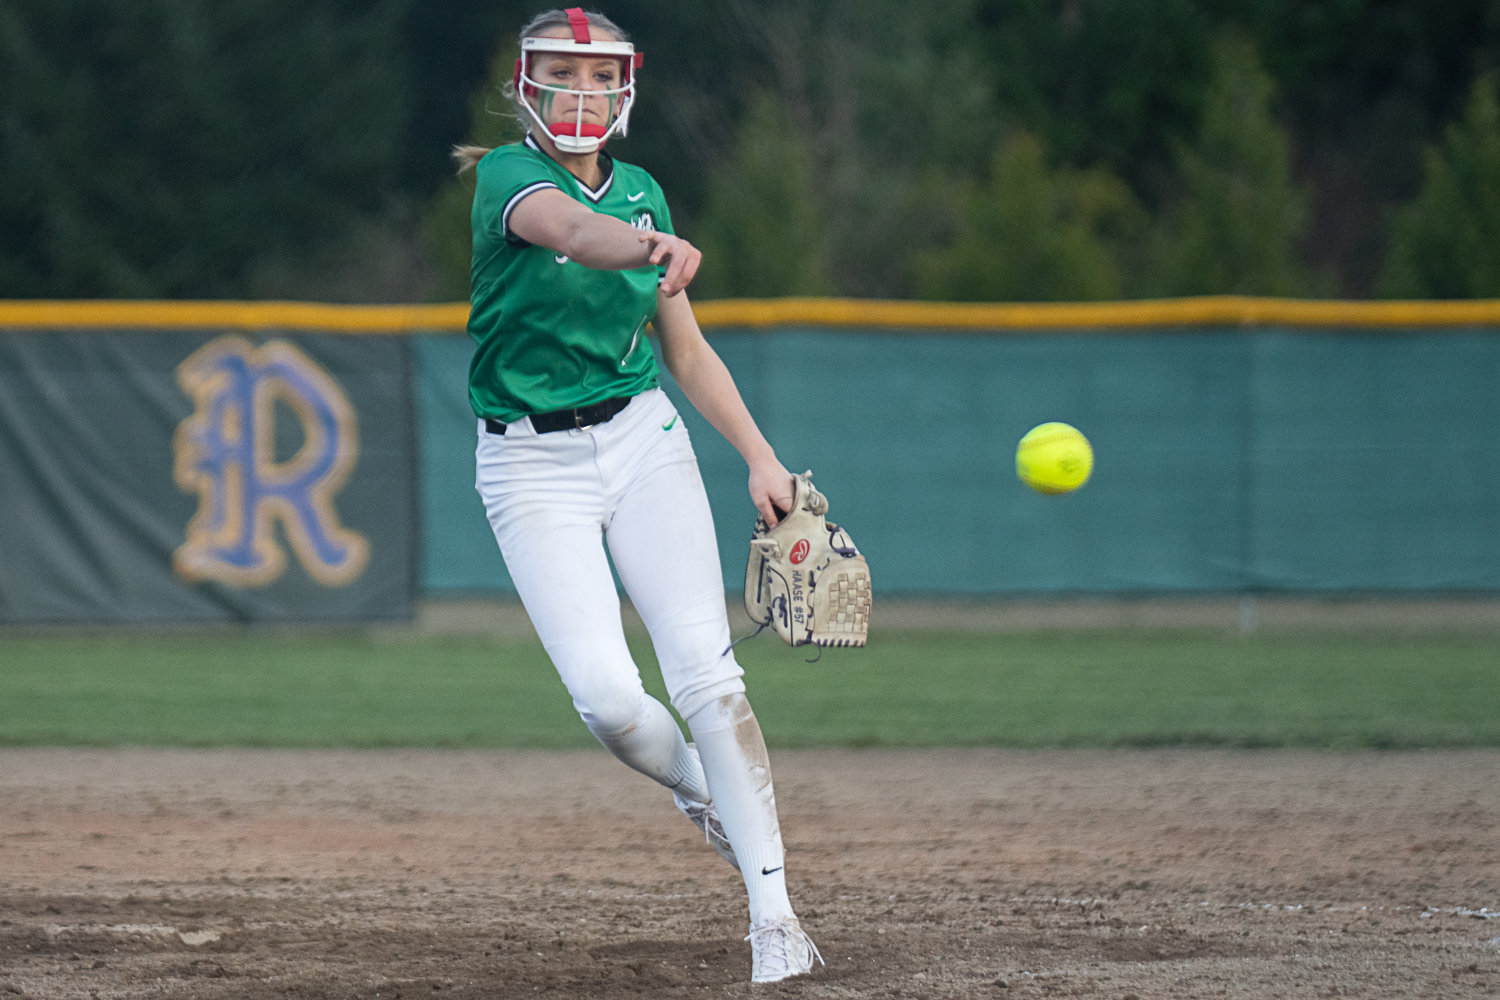 Ella Ferguson zips a pitch homeward during Tumwater's 5-3 win at Rochester on March 29.